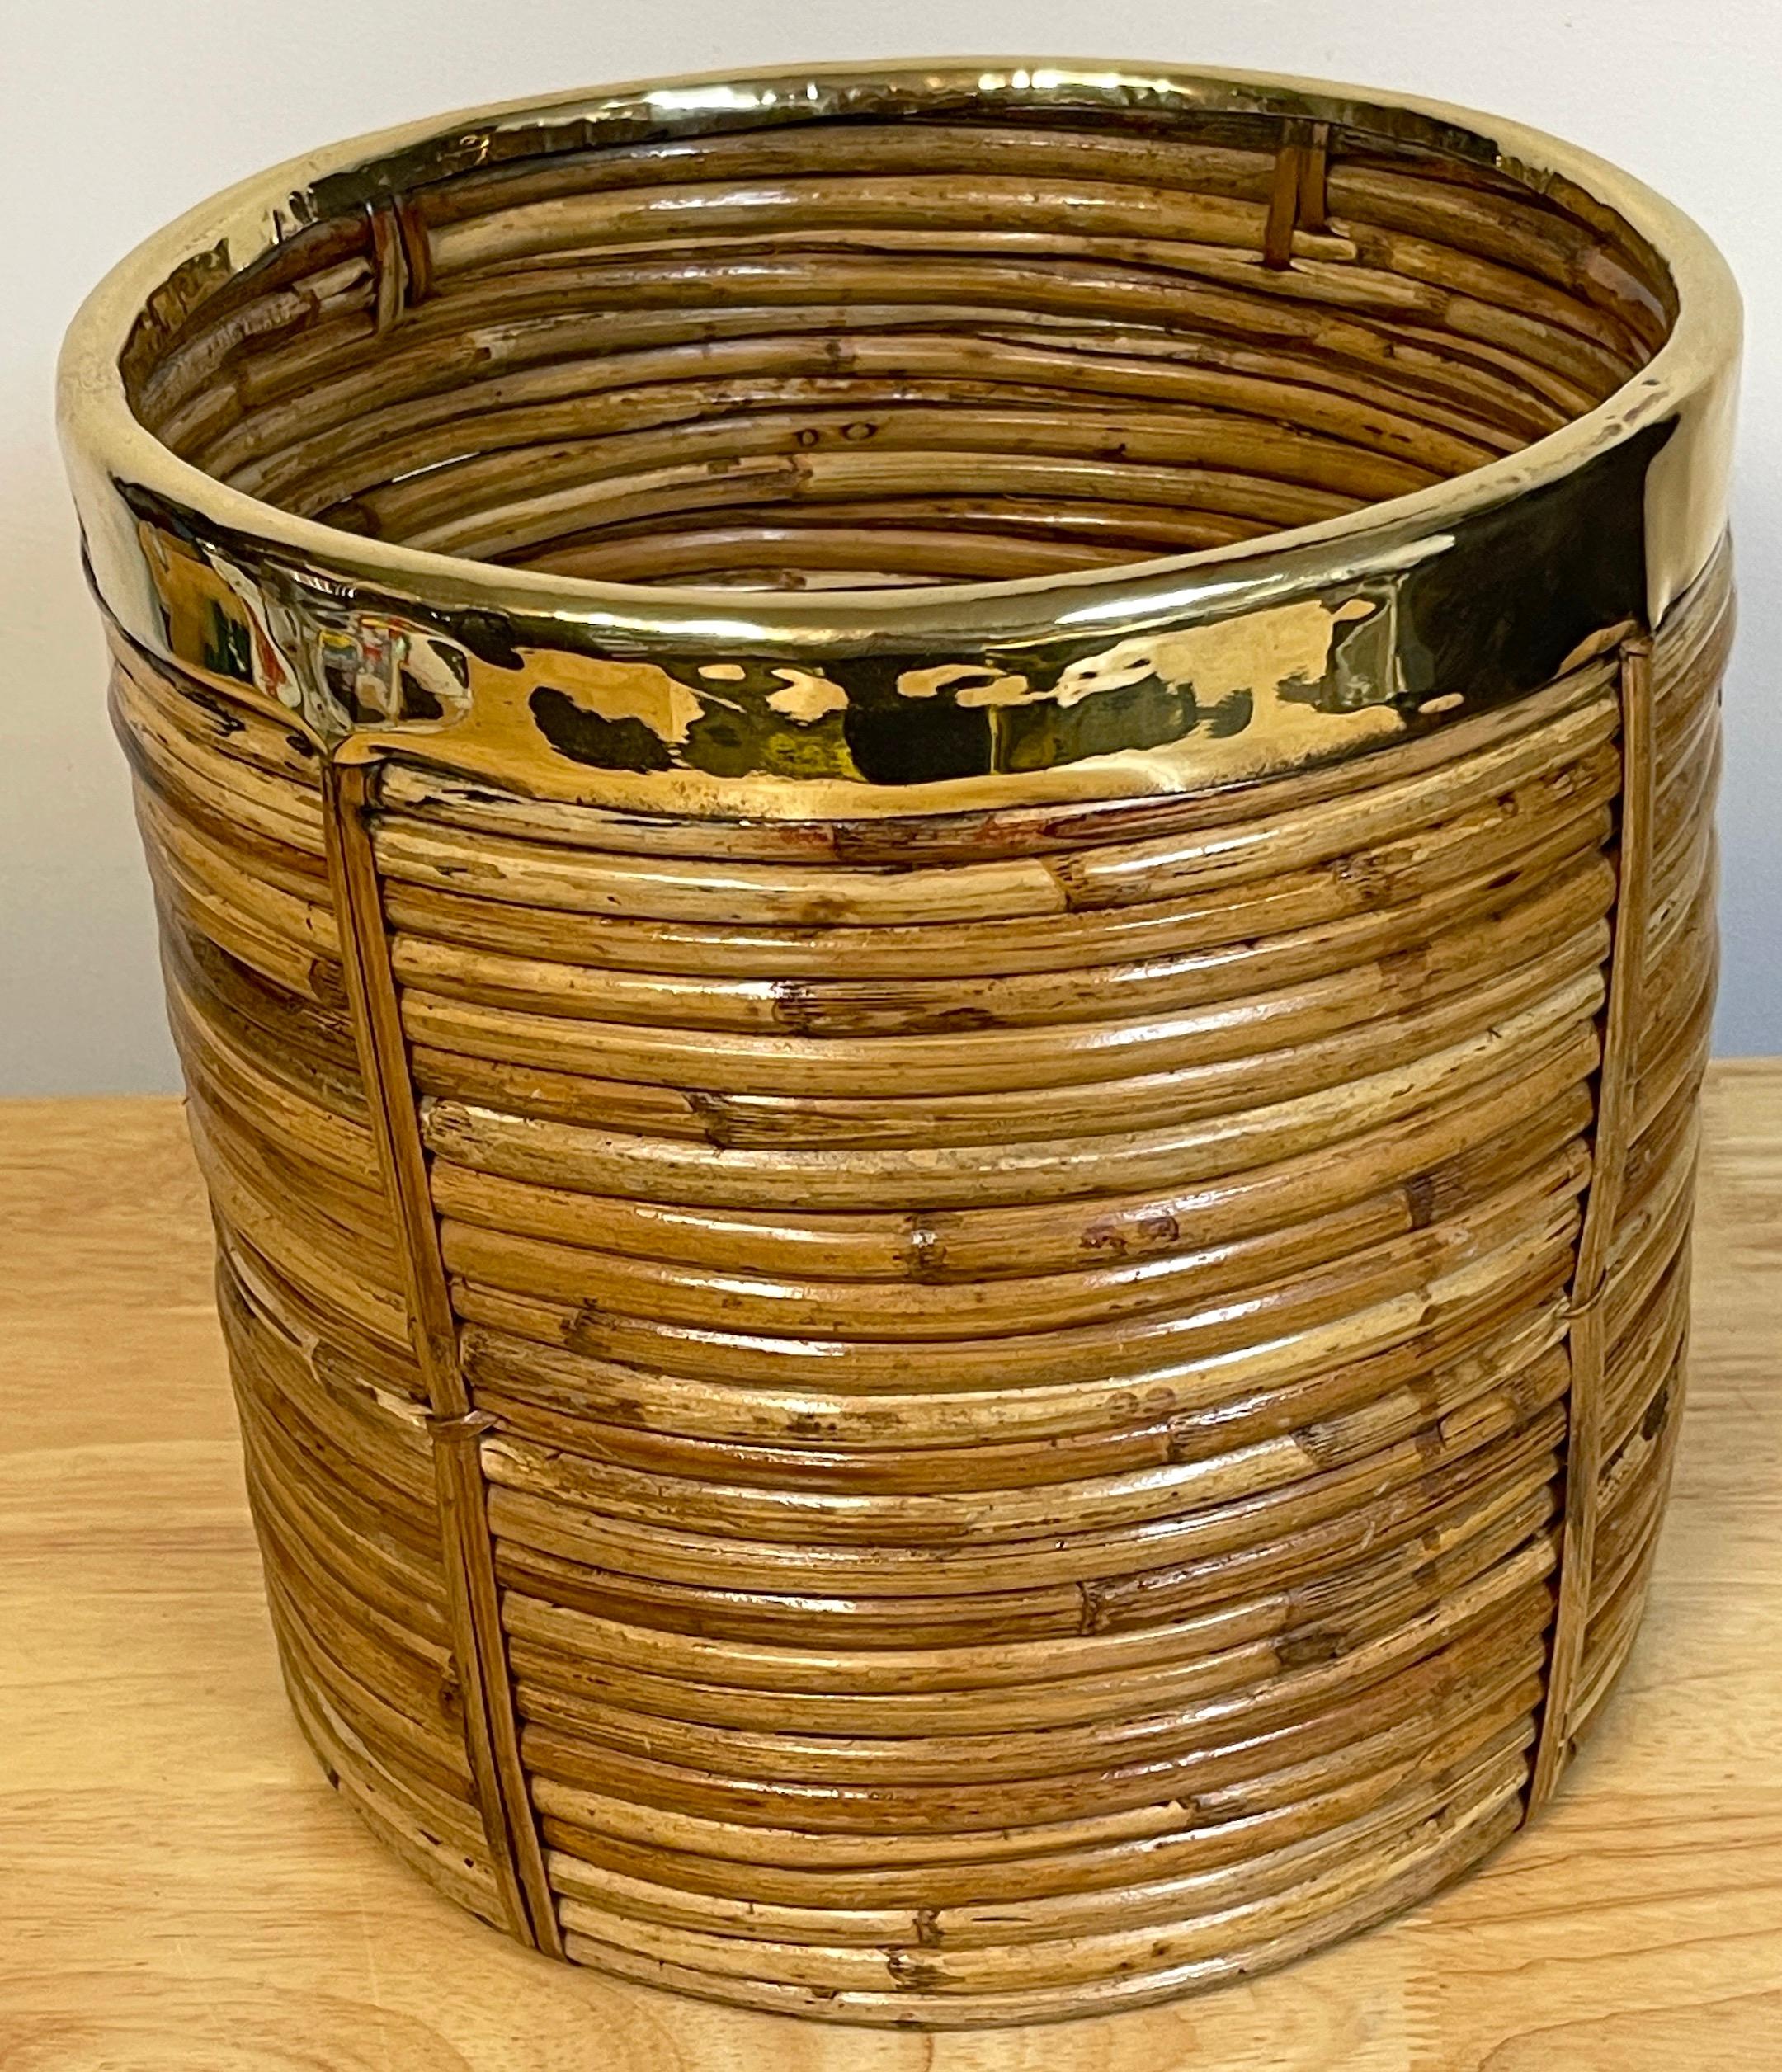 1970s Italian bamboo/ rattan wastepaper basket with polished brass rim
Mid-Century Modern decorative bamboo, rattan and brass Wastepaper basket. basket. Handcrafted in Italy, 1970s. Round in shape with professionally polished brass rim. Inspired on